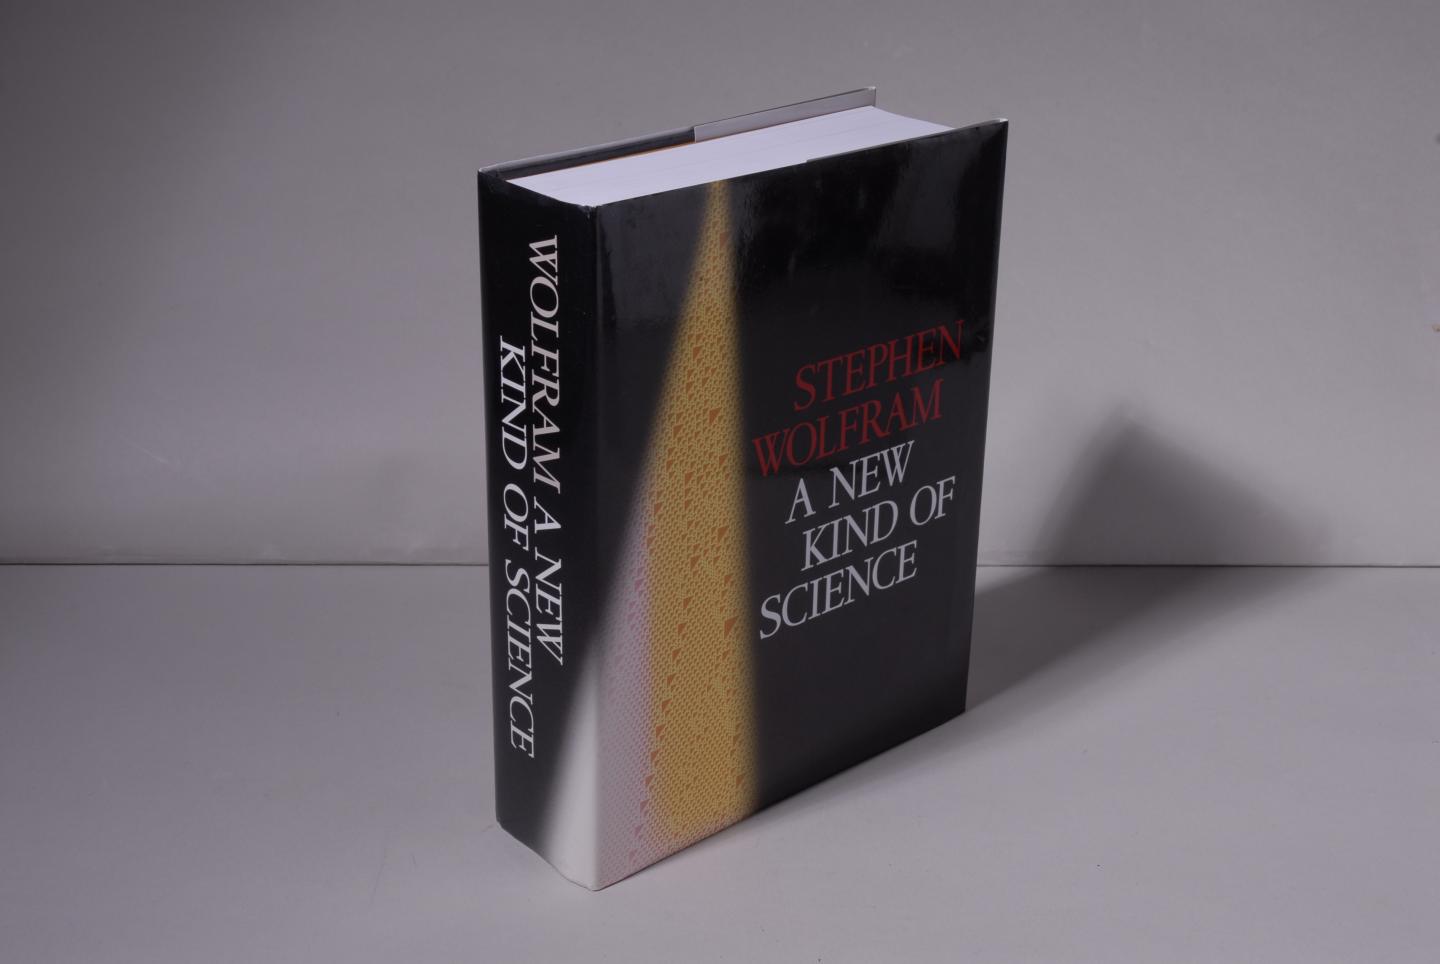 Stephen WOLFRAM - A New Kind of Science.